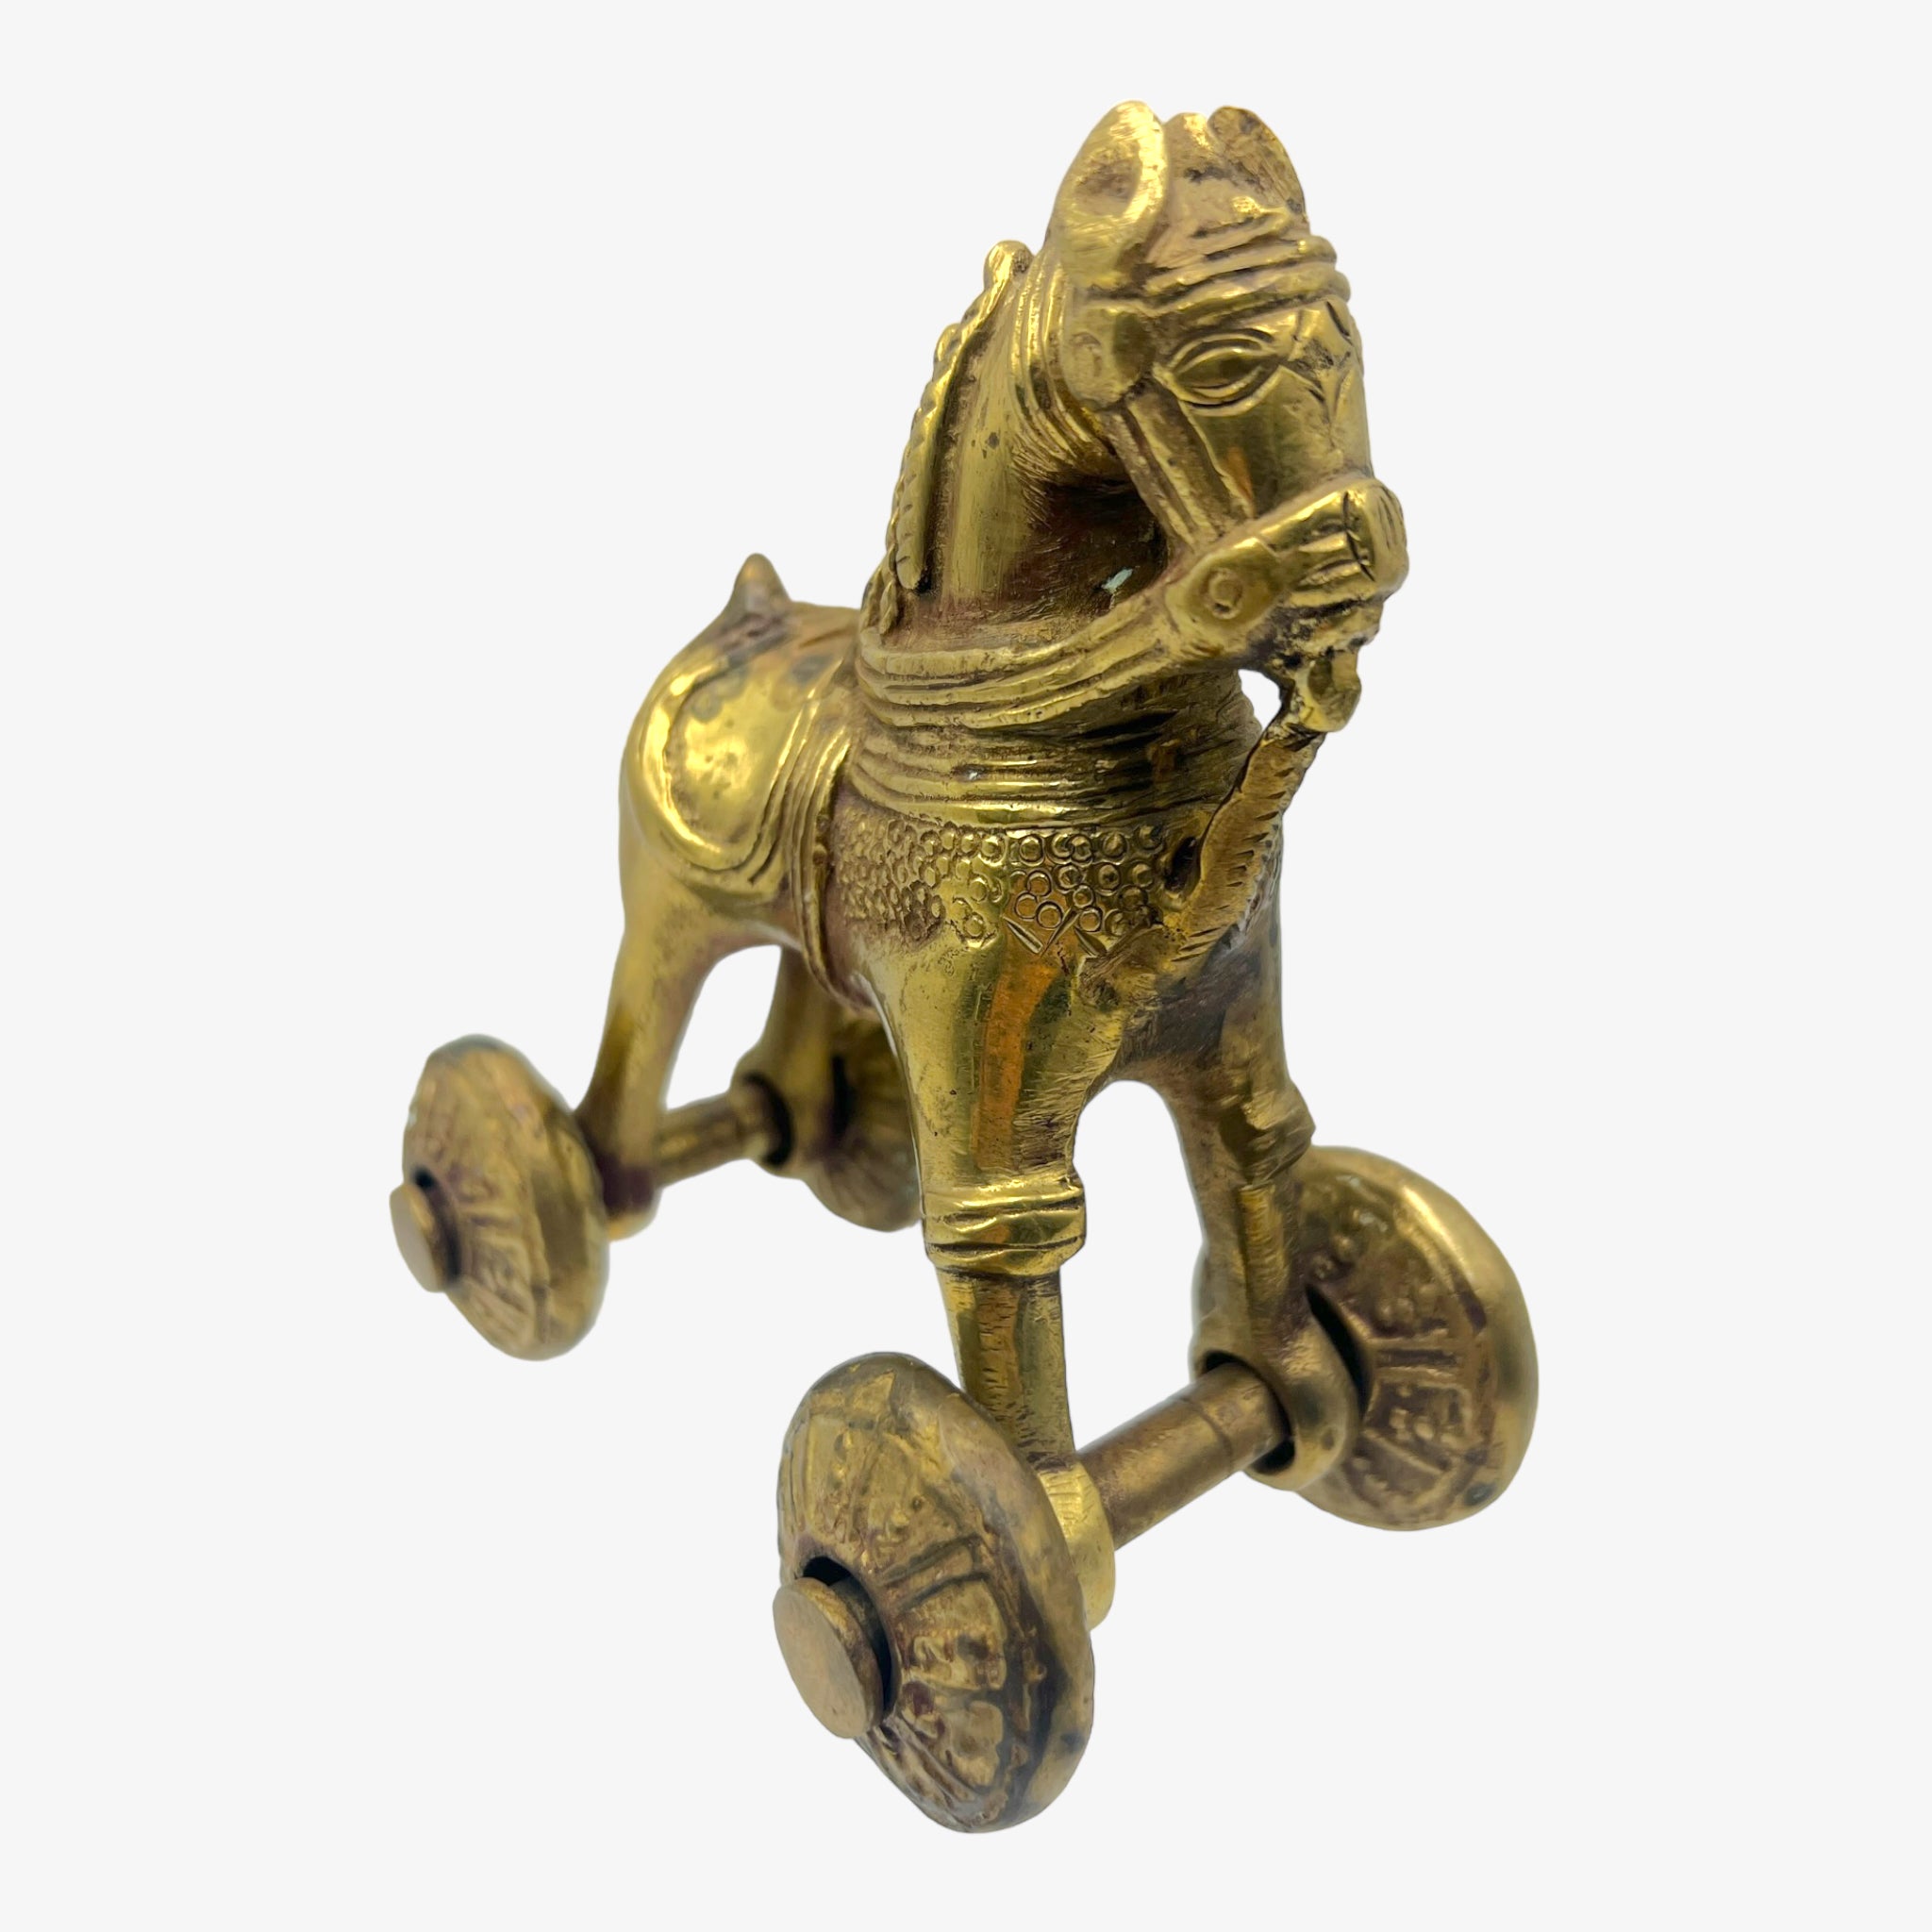 Antique Brass Horse Temple Toy From India